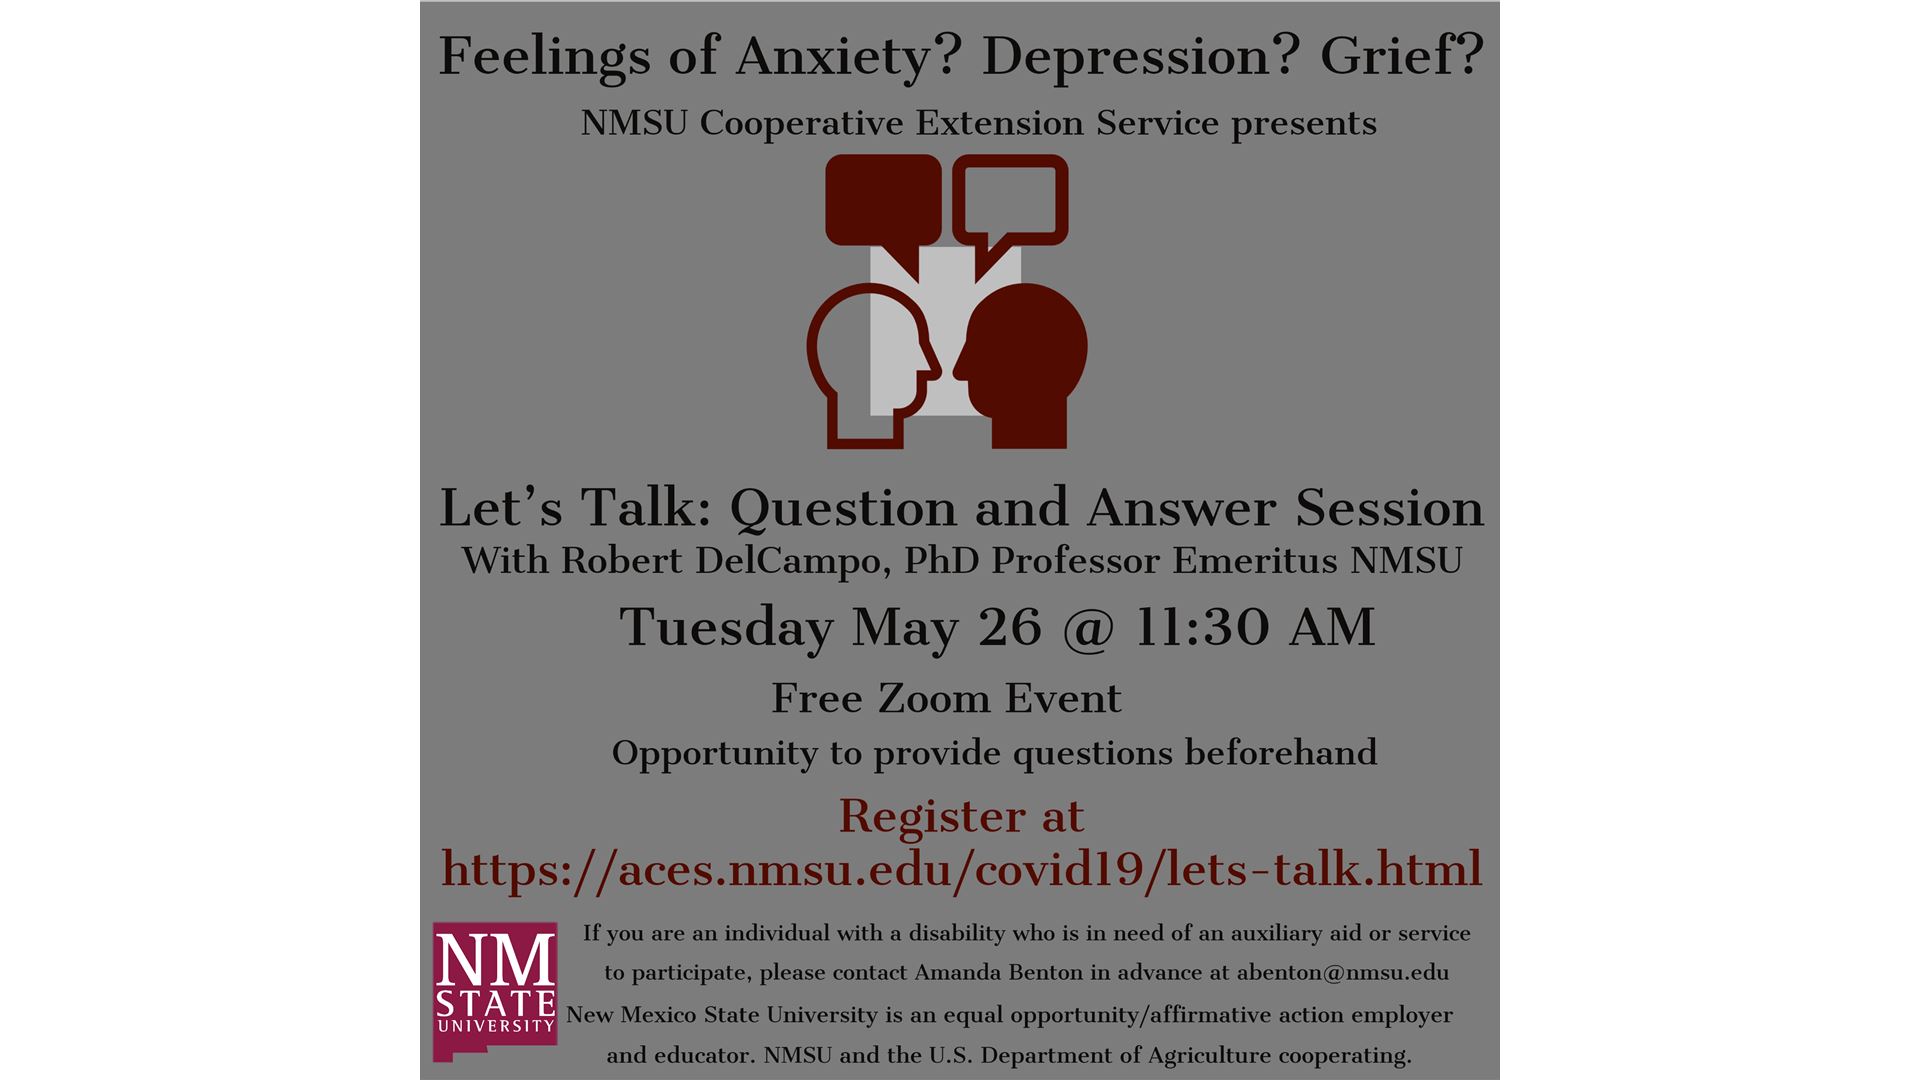 Coping strategies to be discussed at NMSU-hosted webinar